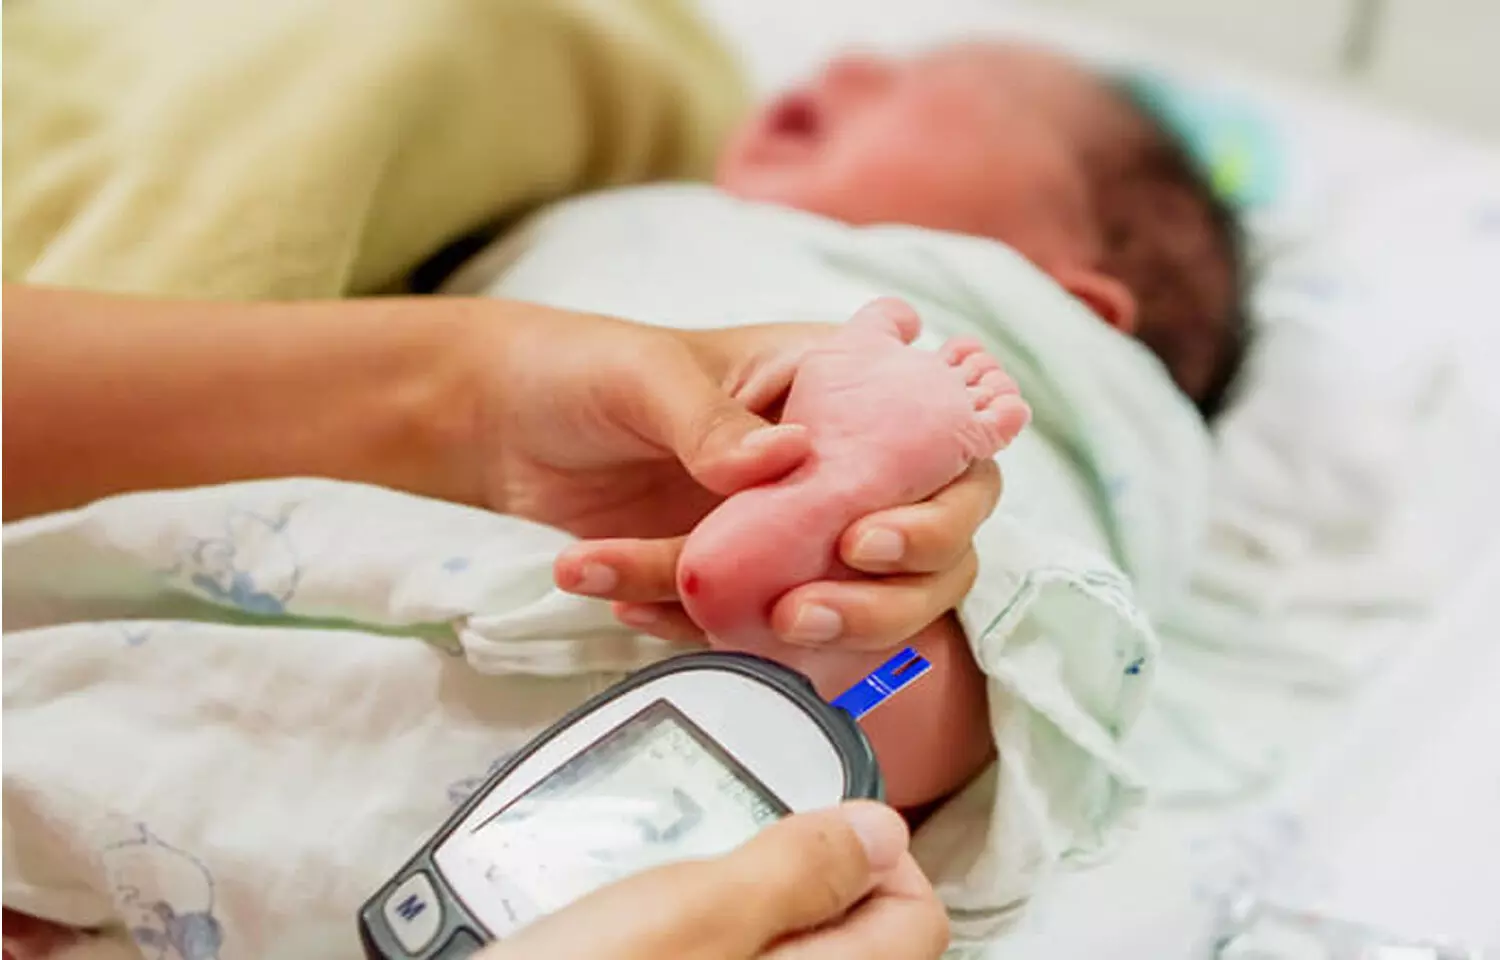 Does Neonatal Hypoglycemia interfere with Mid-Childhood Academic Performance?